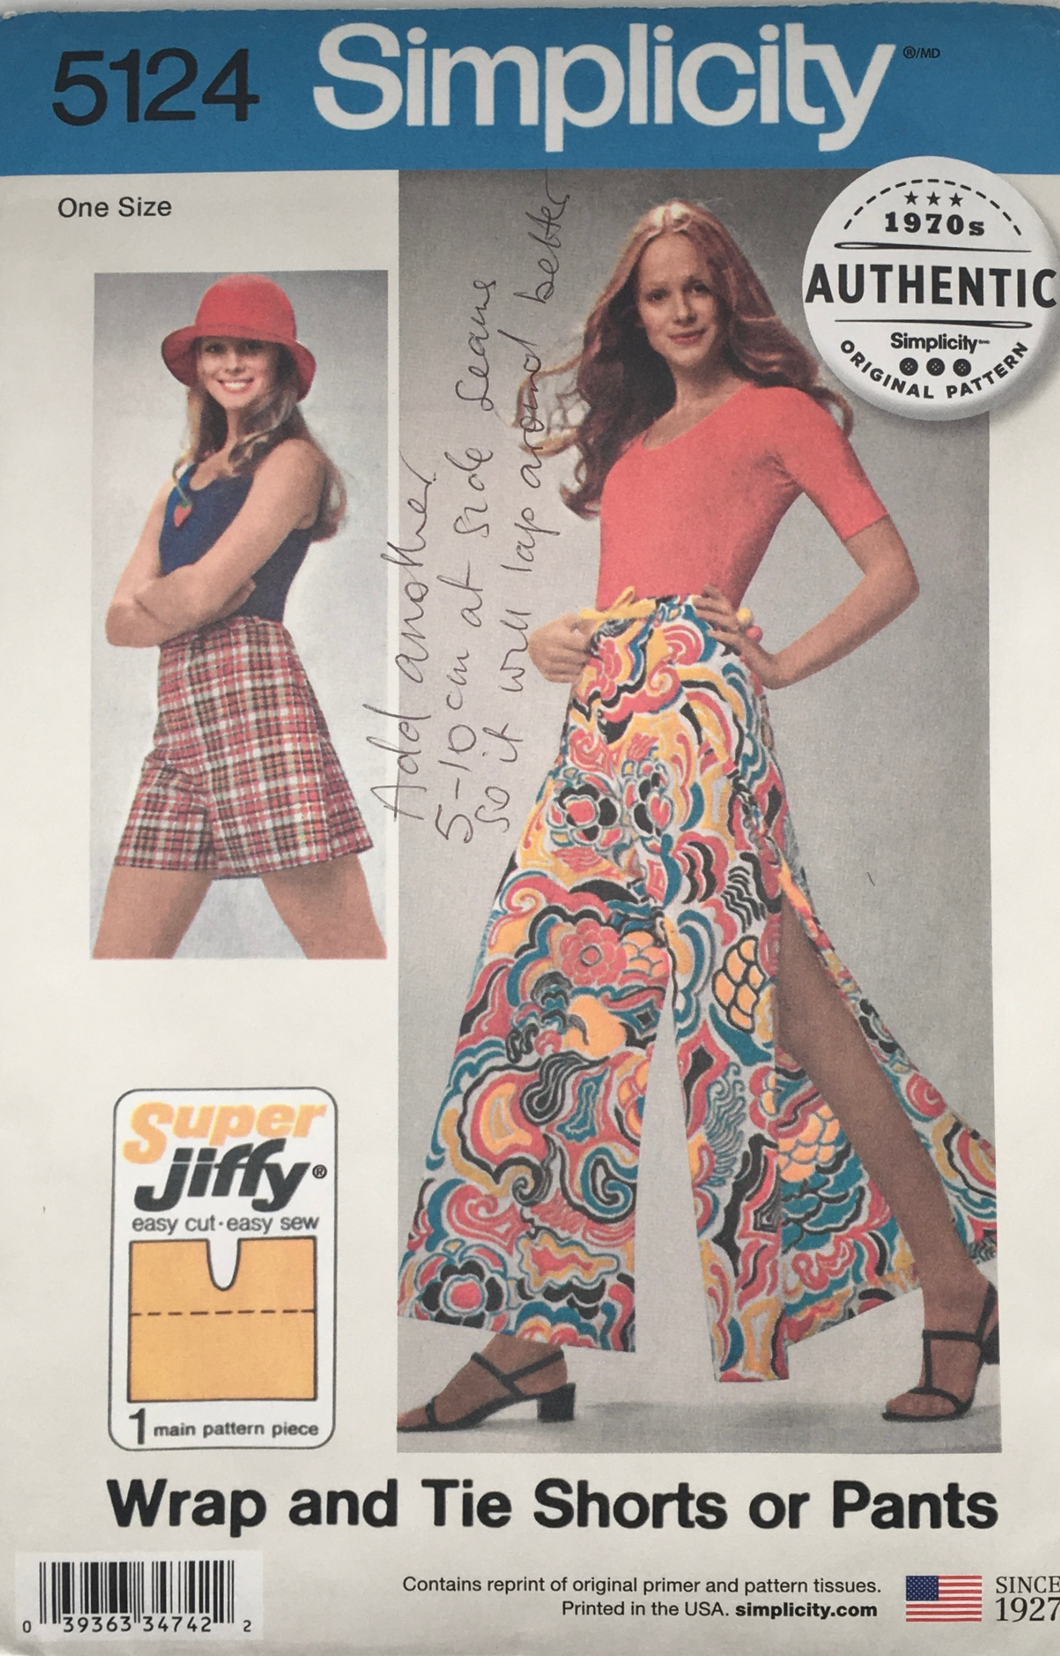 1970's Reproduction Sewing Pattern: Simplicity 5124